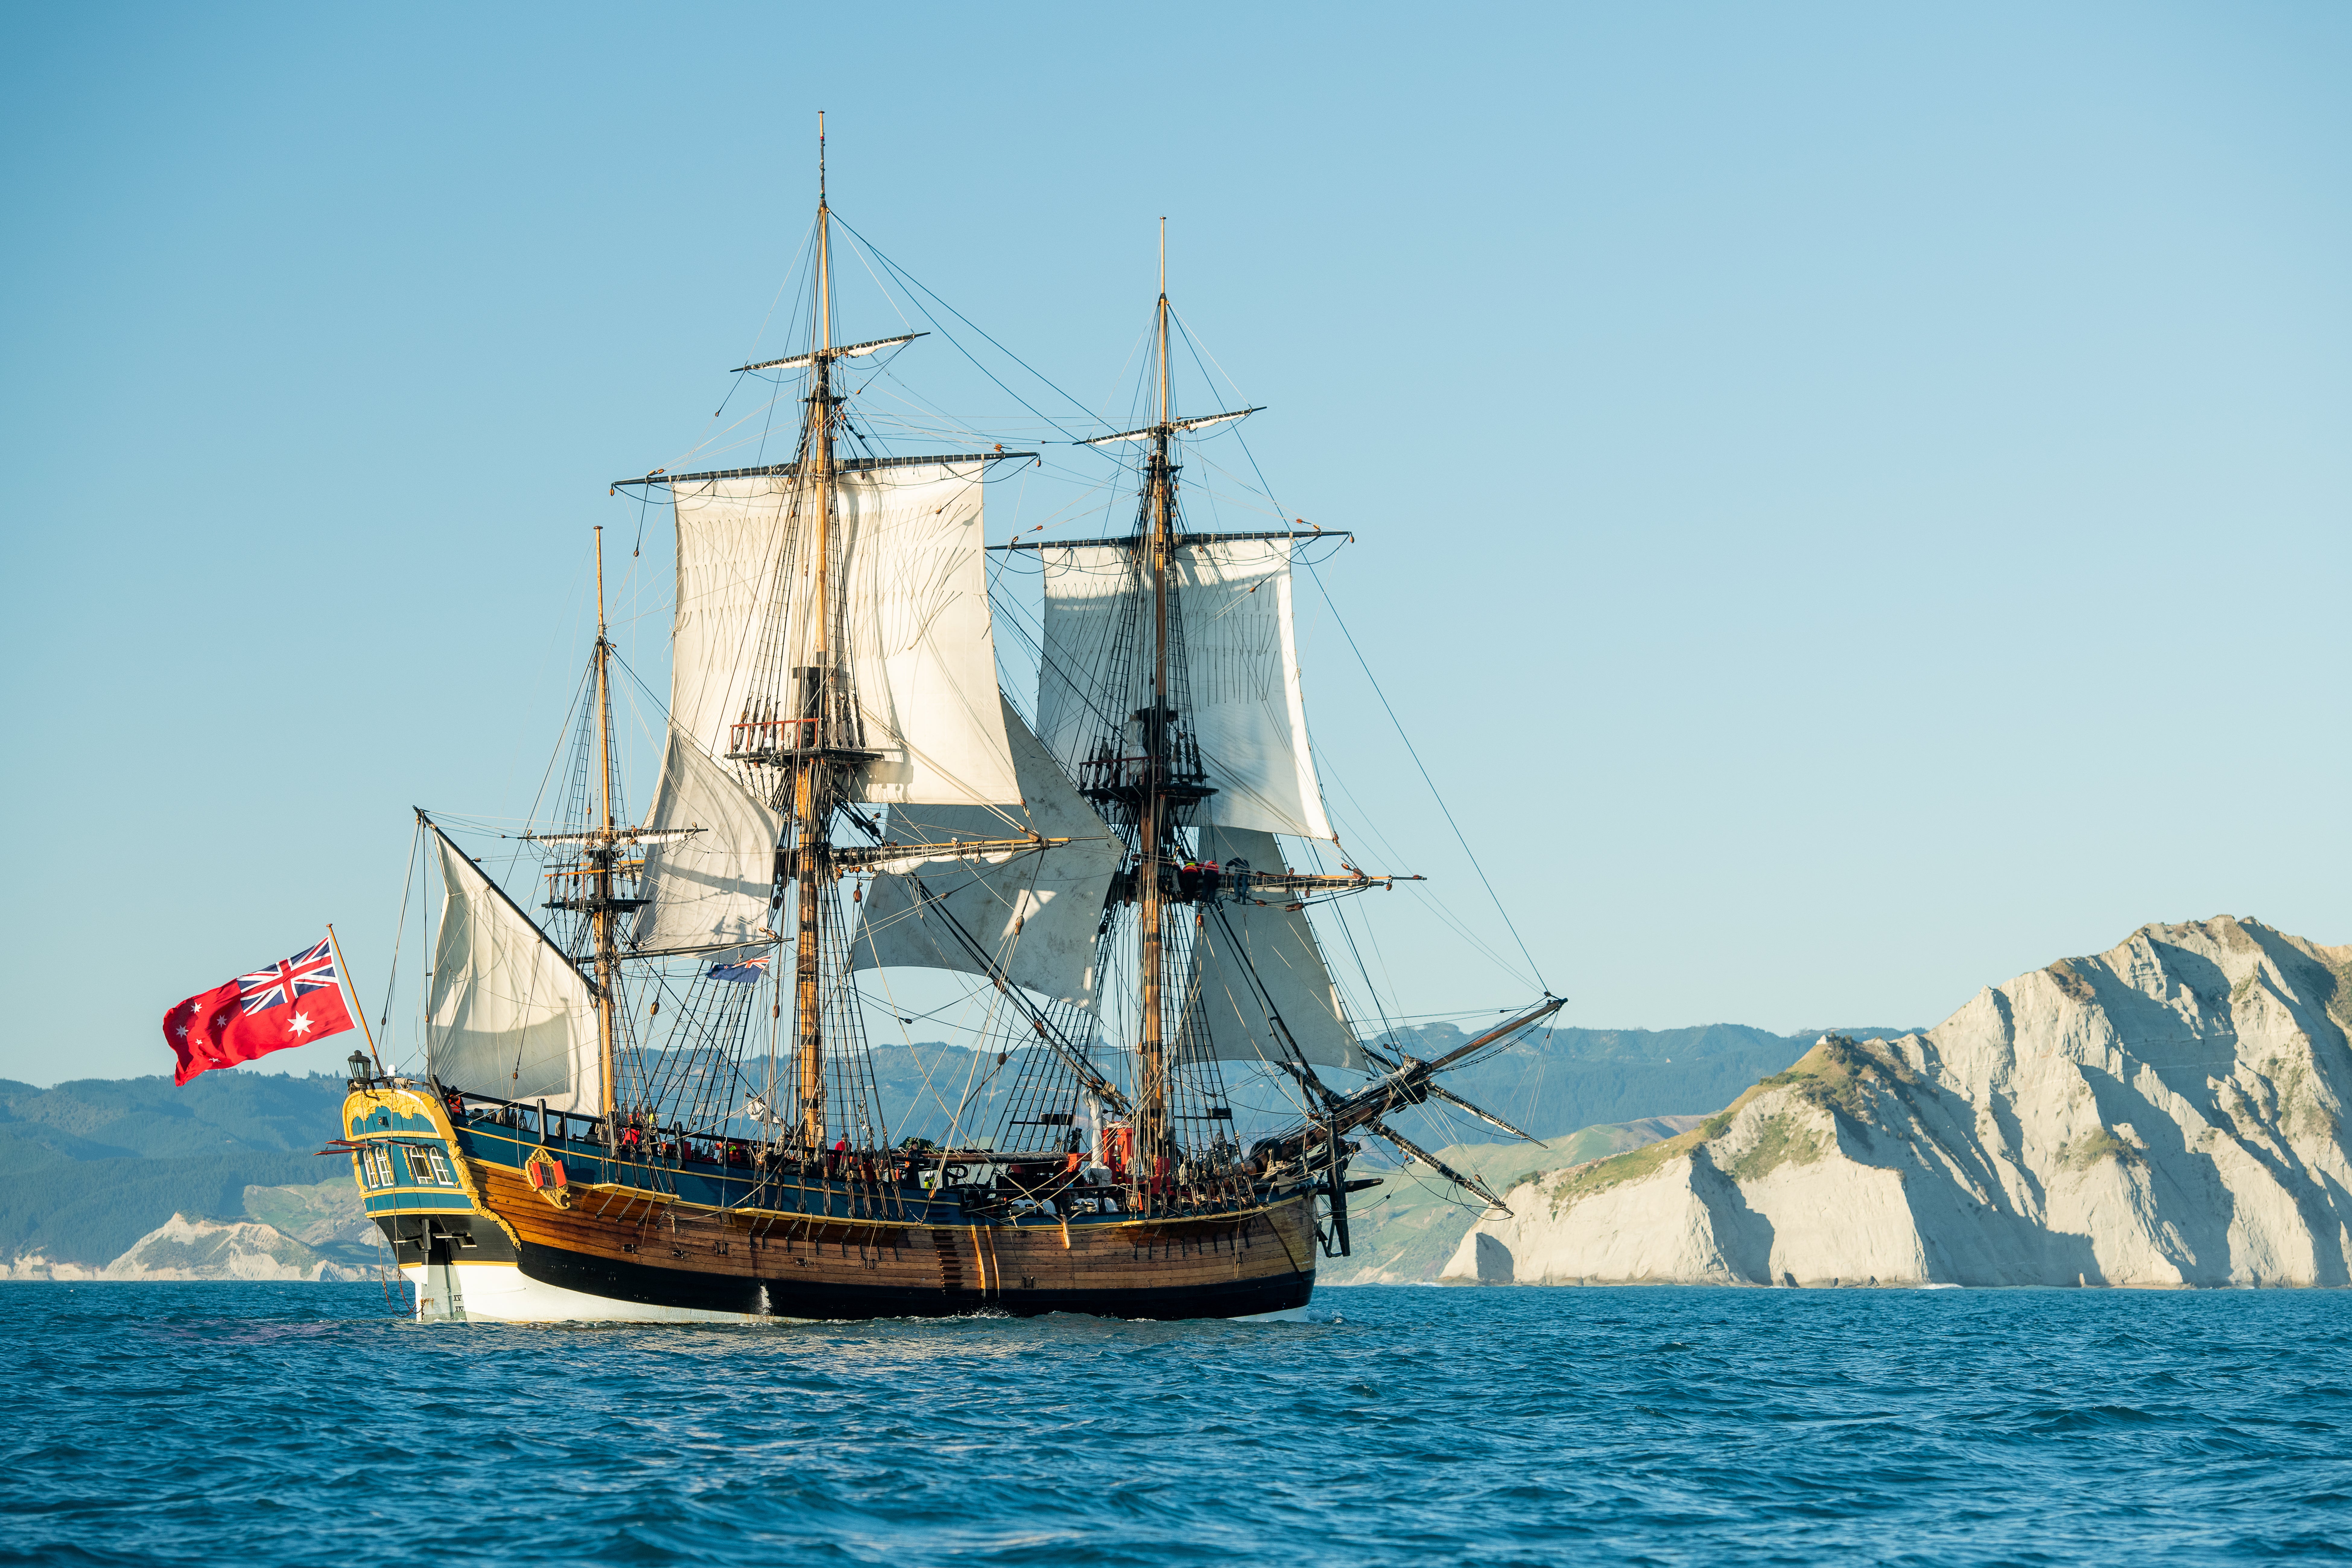 A replica of the ‘HMS Endeavour’ sails into Turanganui-a-Kiwa on 8 October 2019 in Gisborne, New Zealand